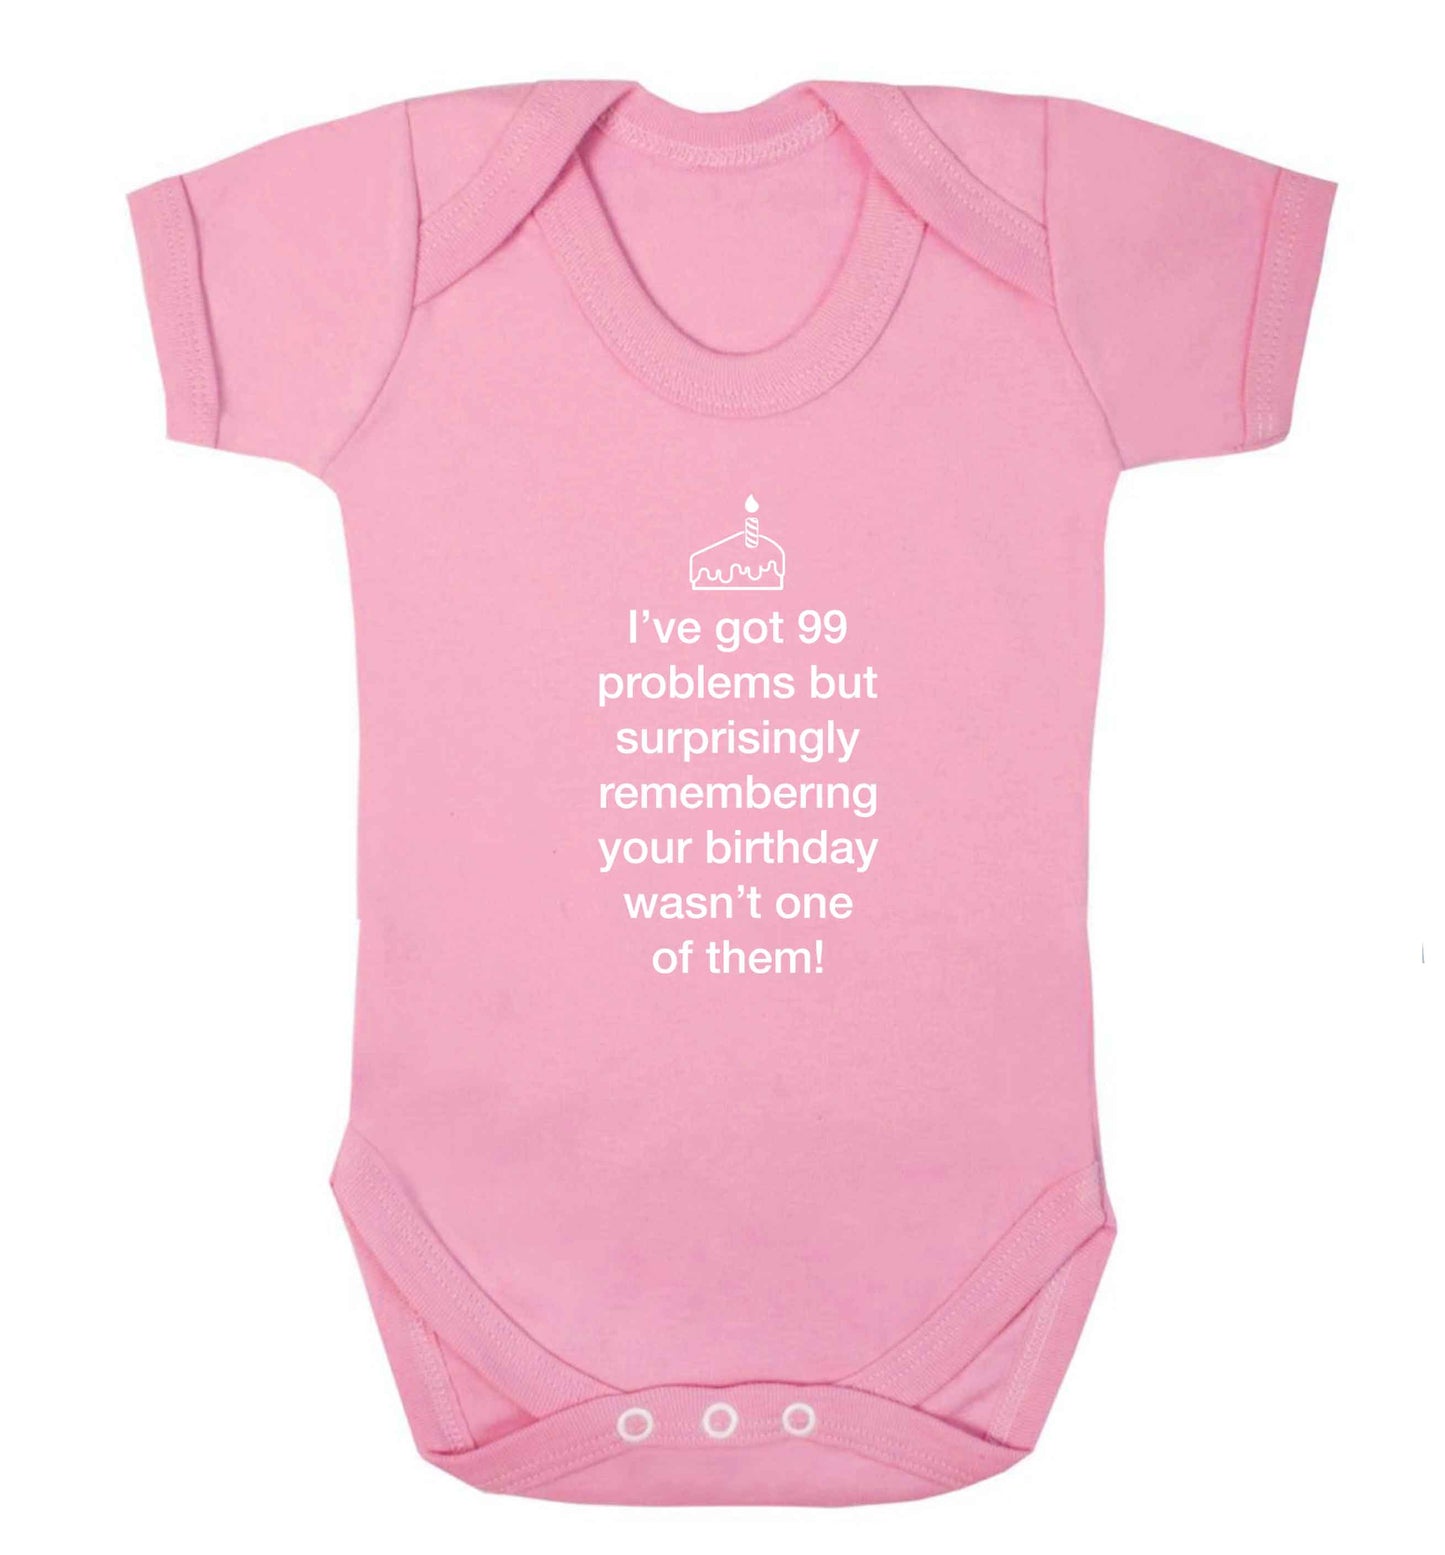 I've got 99 problems but surprisingly remembering your birthday wasn't one of them! baby vest pale pink 18-24 months